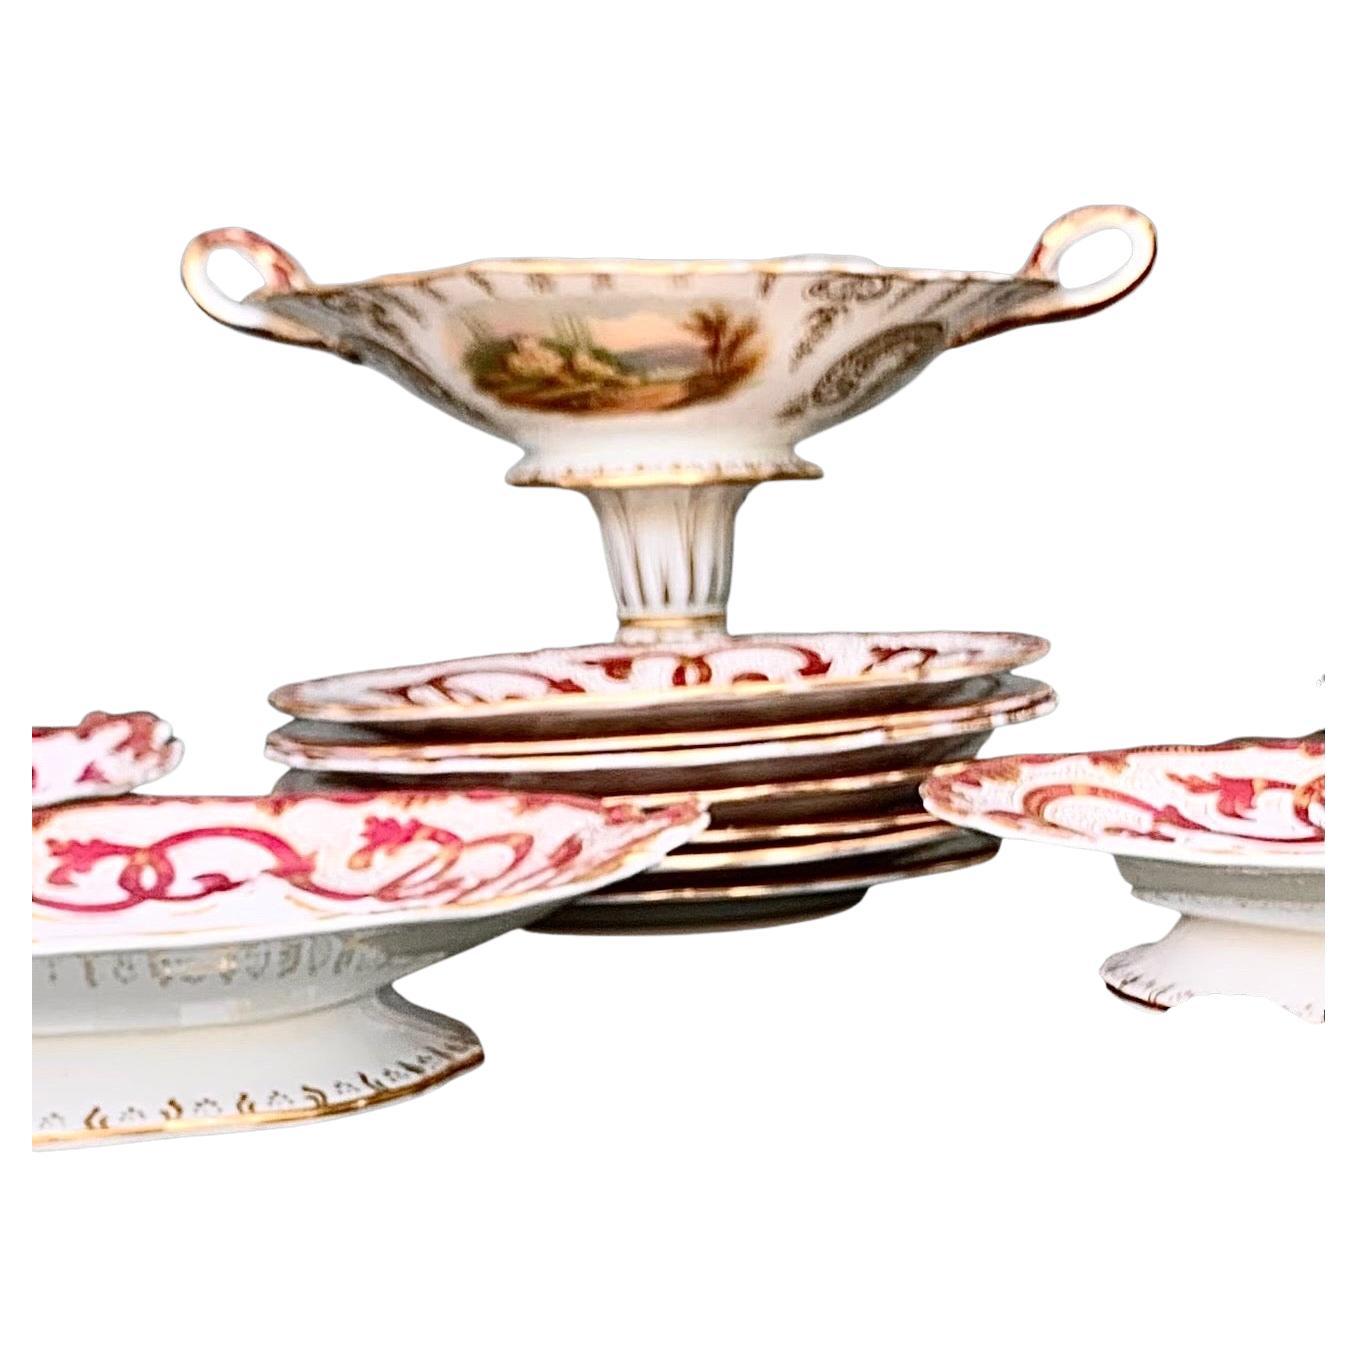 Outstanding and fine, thirteen piece English Staffordshire dessert set, 19th century, by W. Adams and Sons, Stoke-Upon-Trent, with exquisite hand-painted landscape reserves surrounded by broad magenta and gilt scroll borders, consisting of five